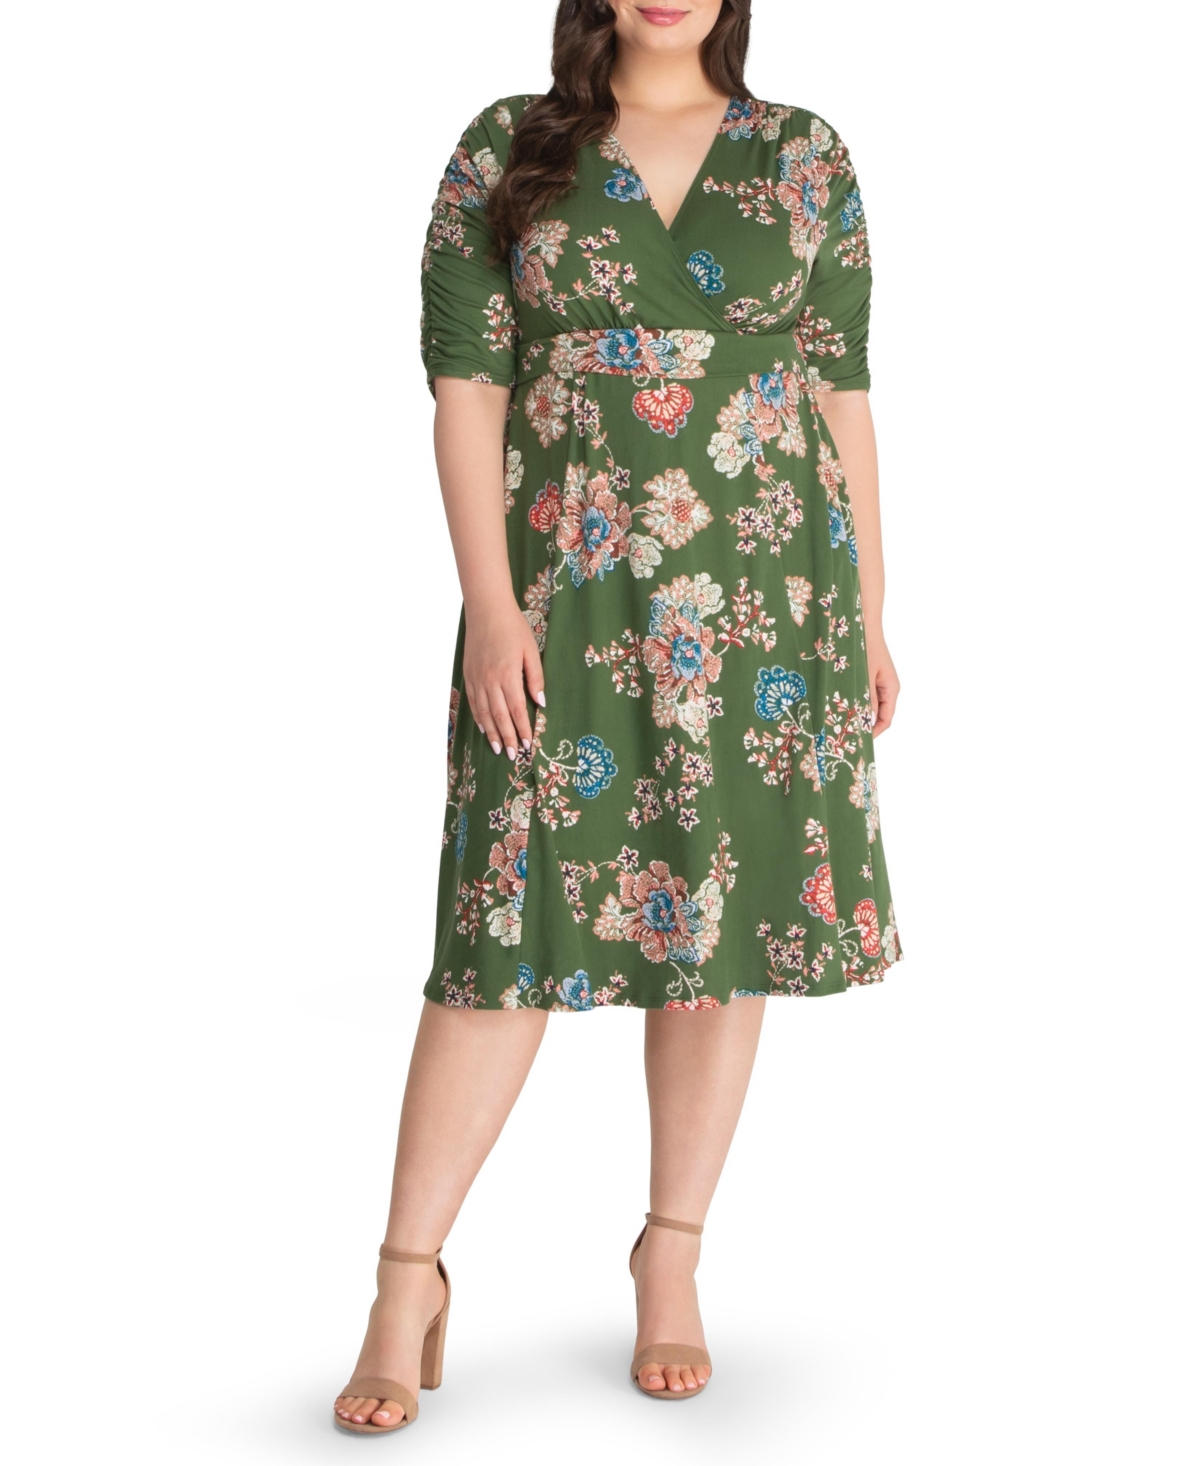 Women's Plus Size Gabriella Ruched Sleeve Midi Dress with Pockets - Ivory floral print